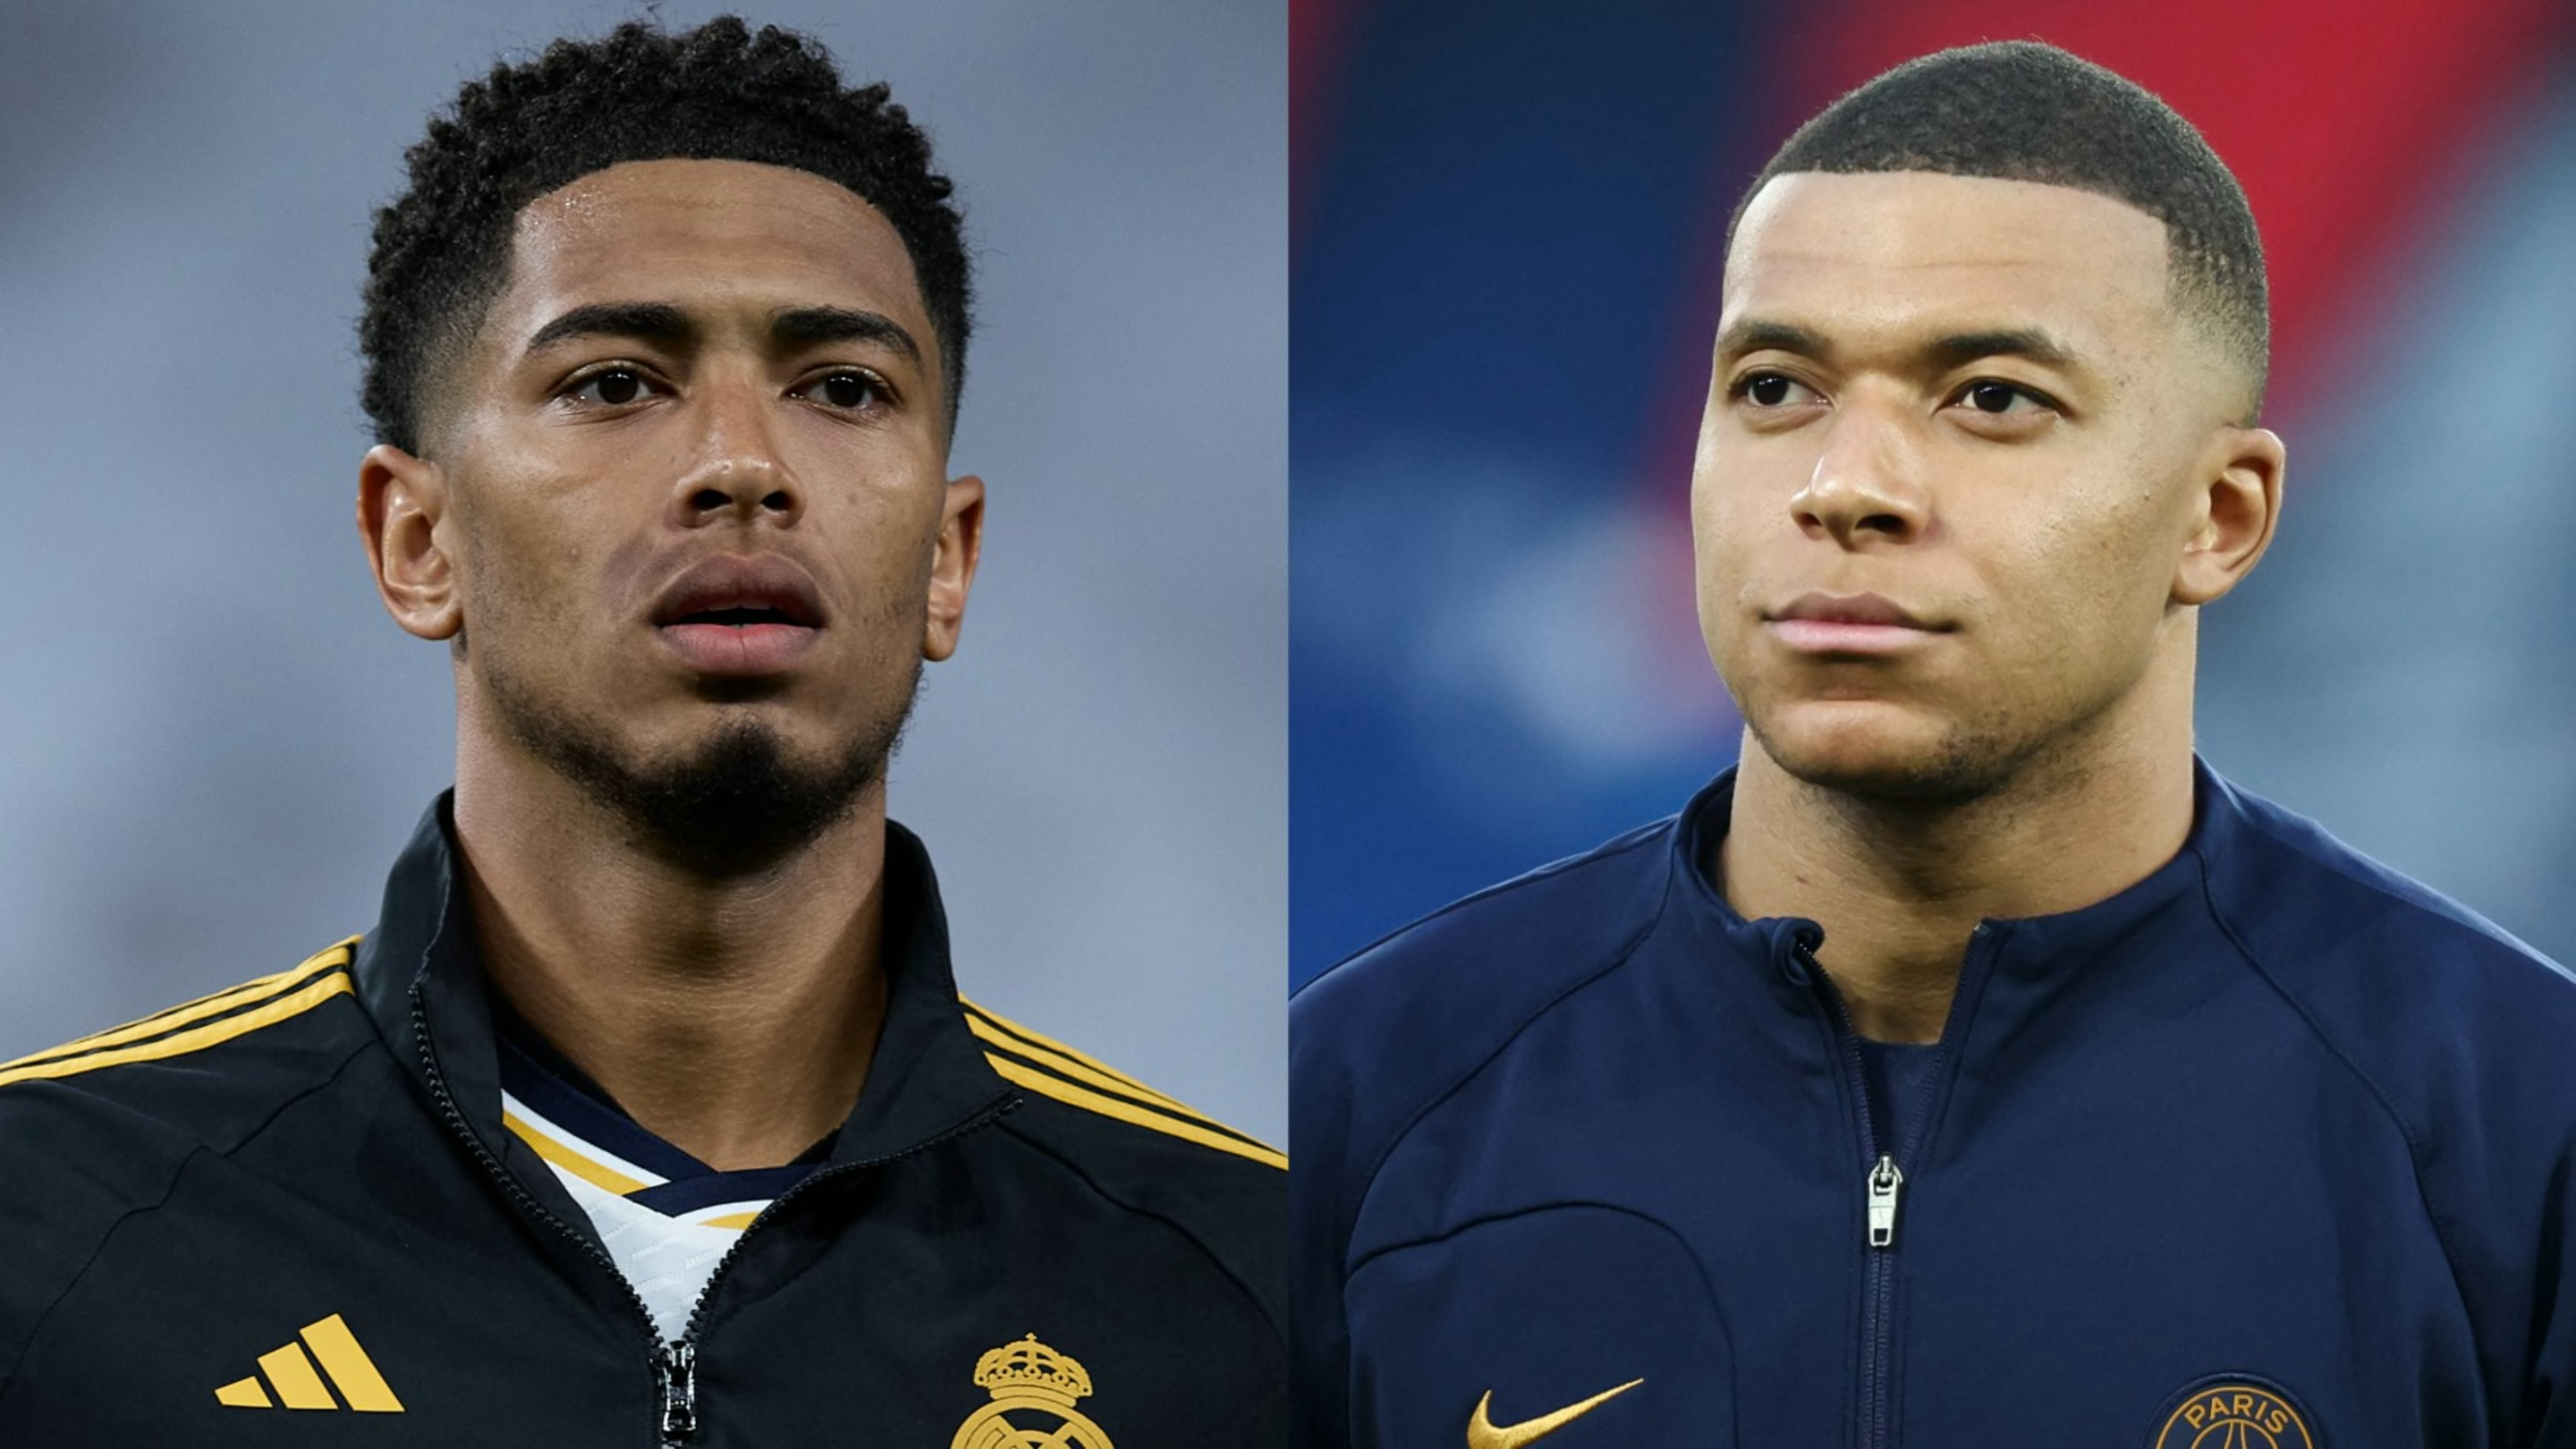 'What a player!' - Jude Bellingham opens up on playing with Kylian Mbappe